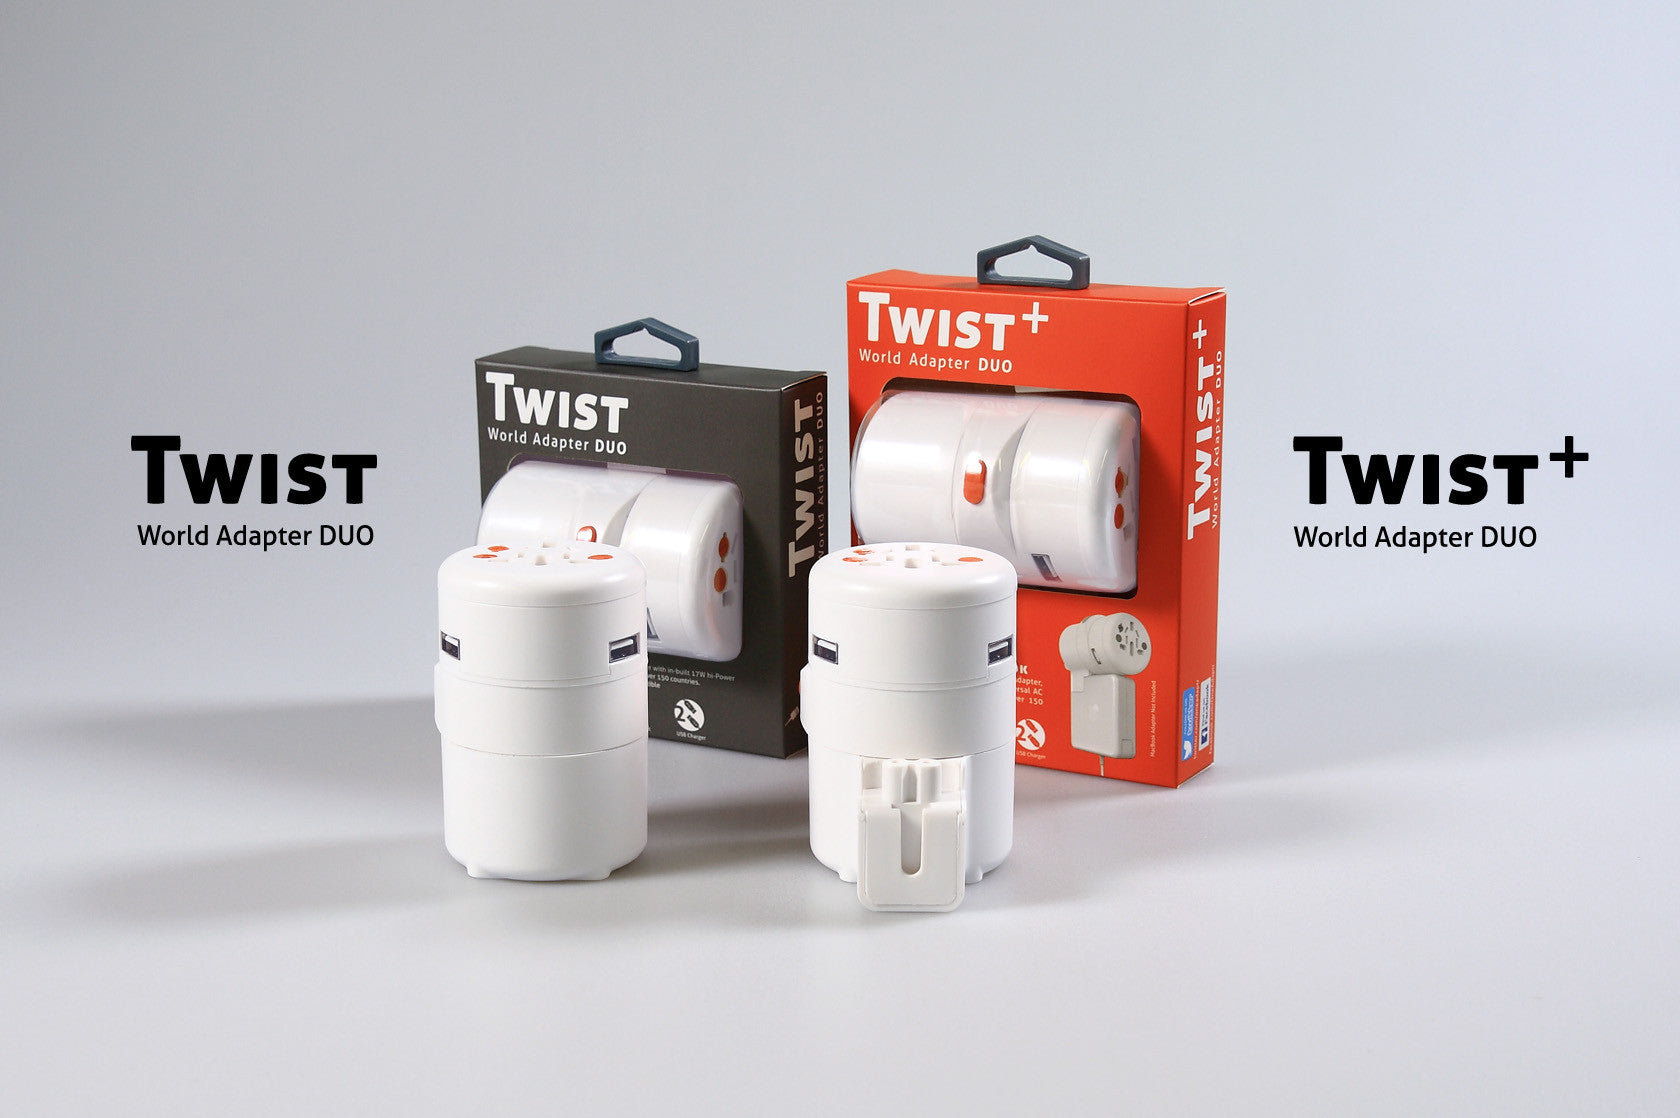 TWIST / TWIST+ World Adapter DUO are now in stock!